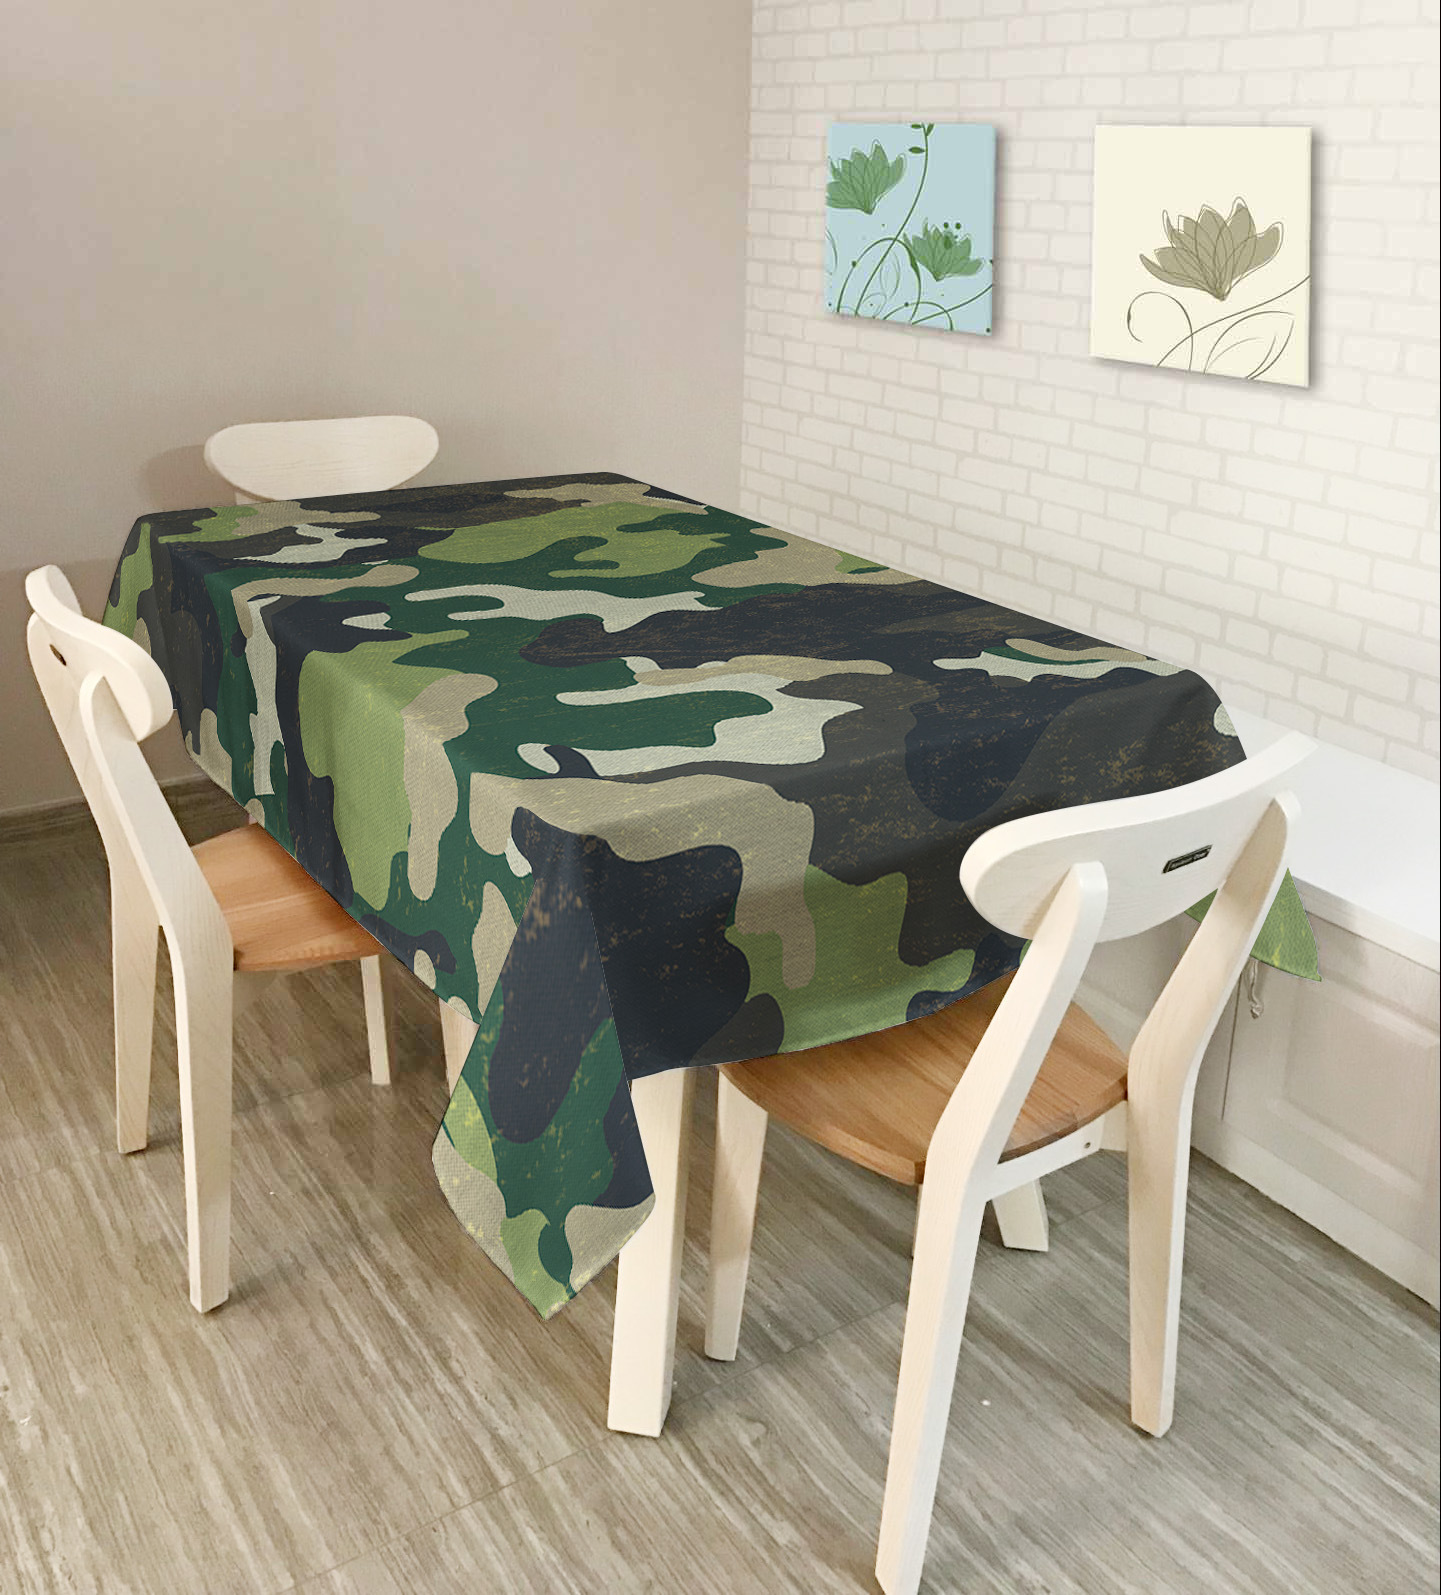 American-Style-Creative-Landscape-Tablecloth-Waterproof-Oil-Proof-Tea-Tablecloth-Home-Party-Decor-1185731-2